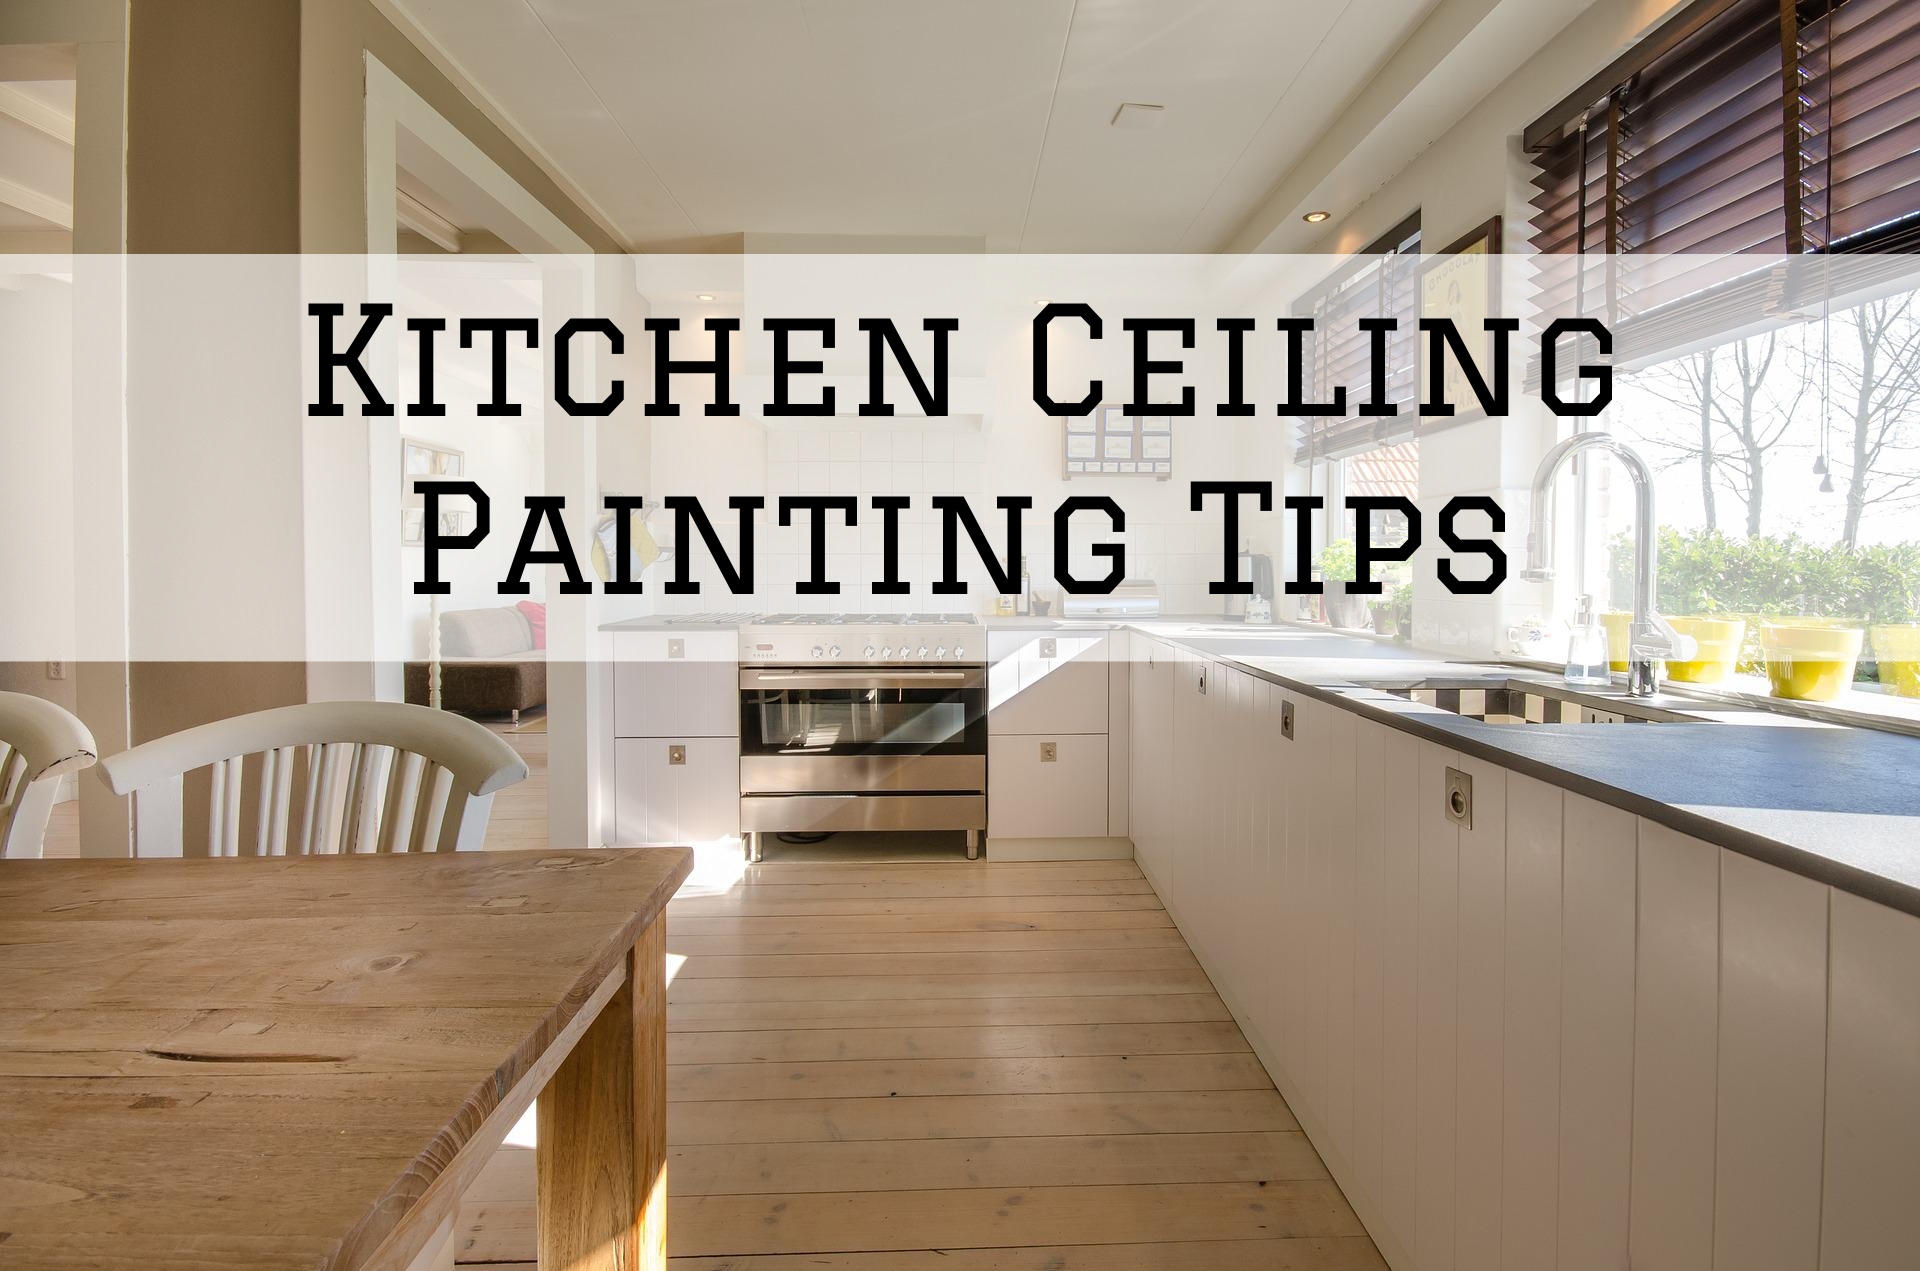 Kitchen Ceiling Painting Tips